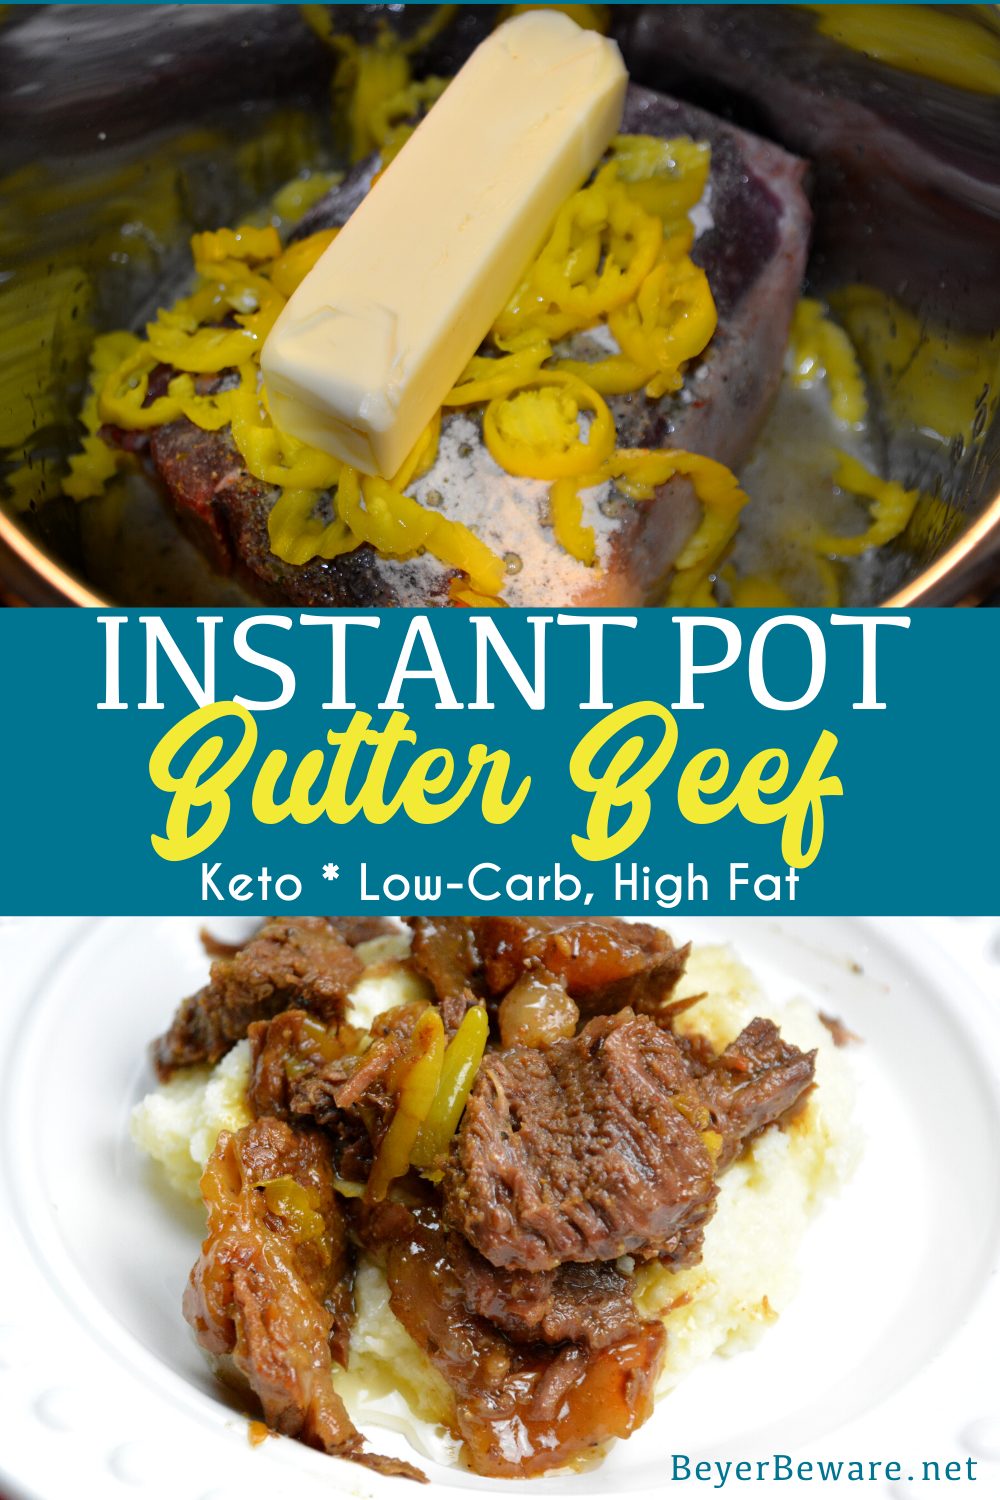 Keto Instant Pot butter beef recipe is my favorite keto roast recipe because it is full of flavor, tender to eat and perfect over mashed cauliflower or potatoes for those not on a low-carb diet. #Keto